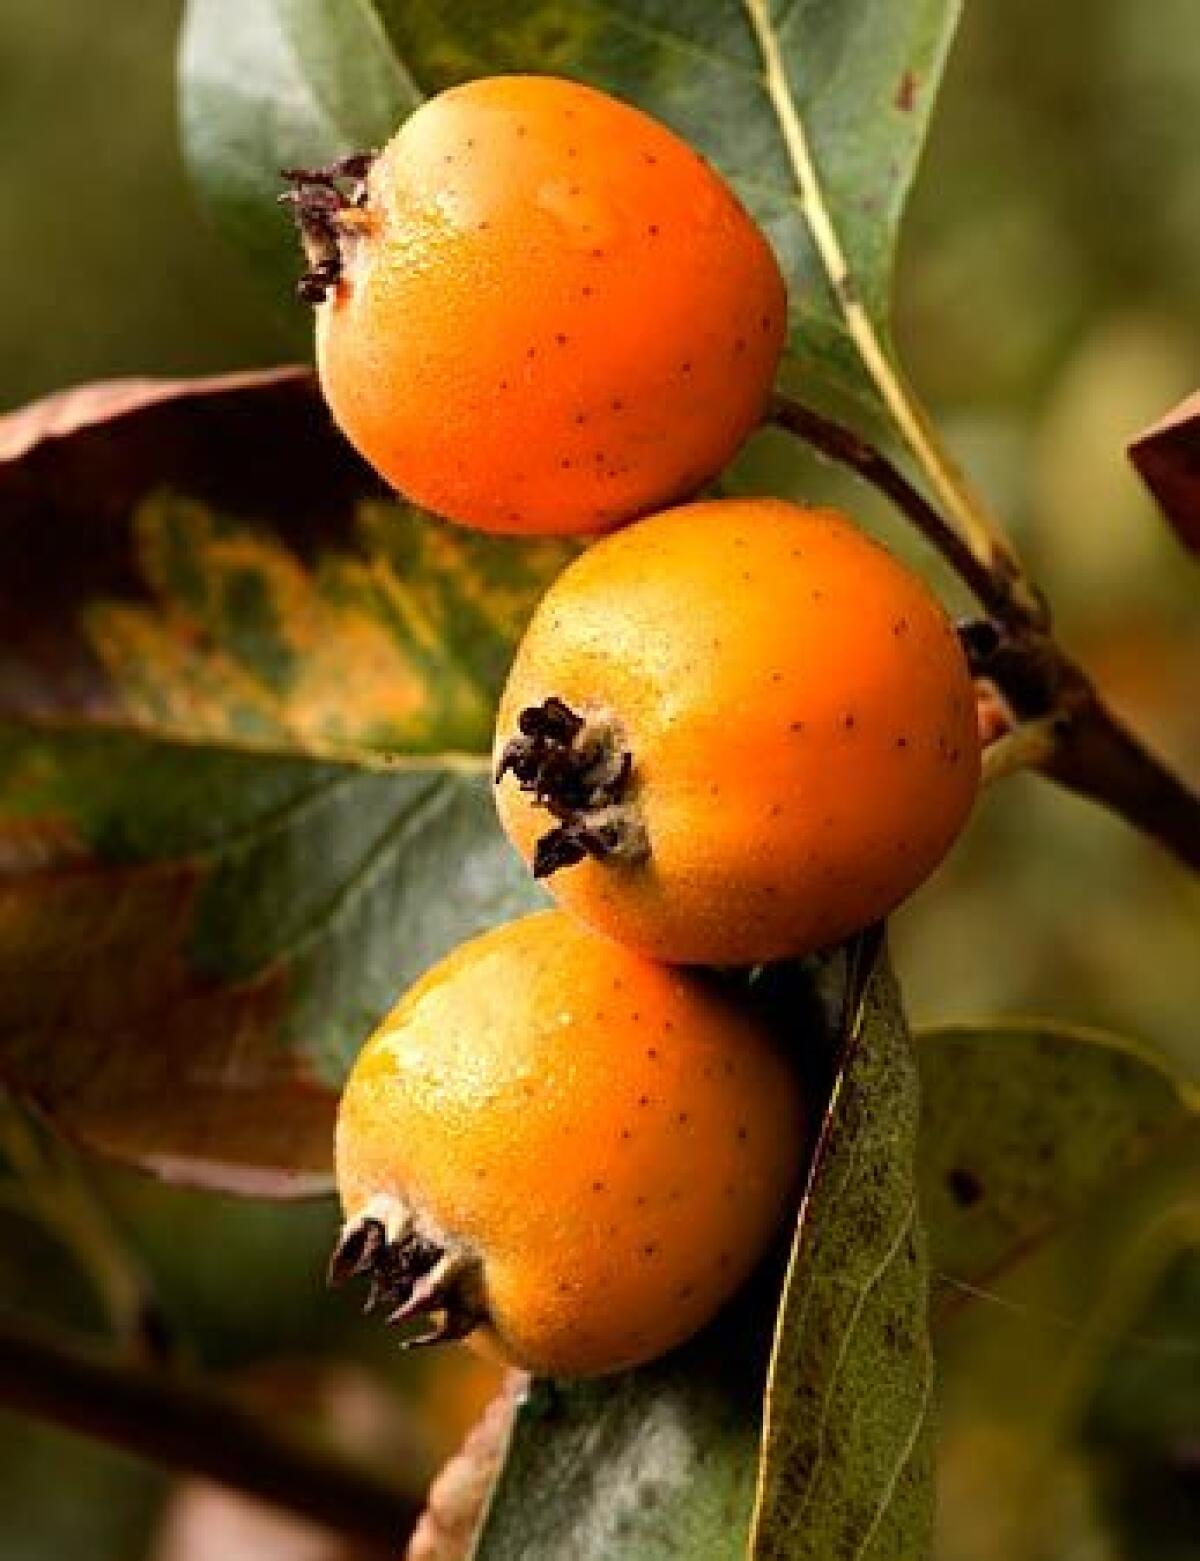 Tejocote is a peculiar crabapple-like fruit common to Mexico but now grown commercially in the United States.